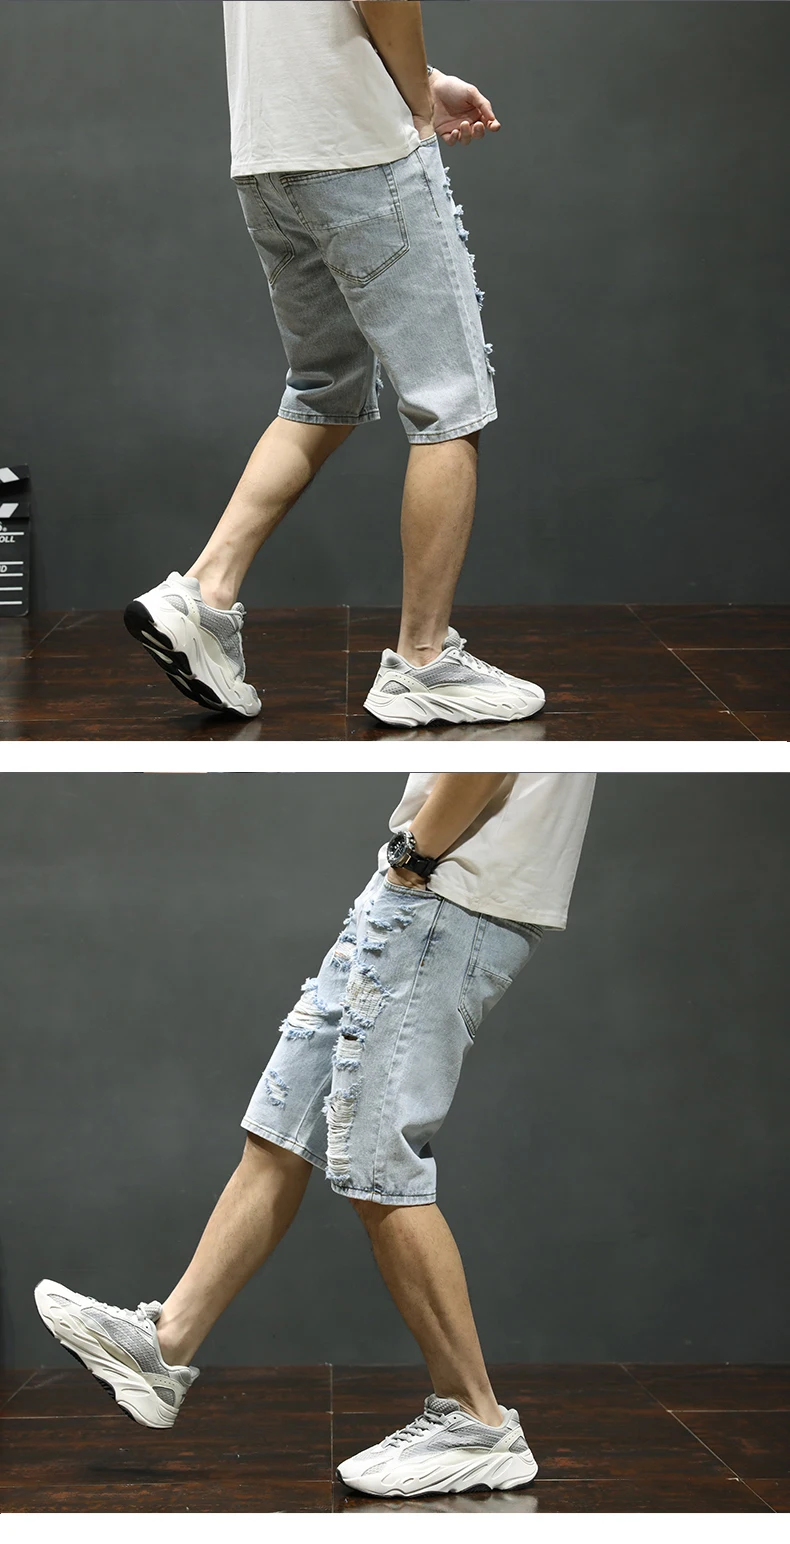 KSTUN Mens Ripped Short Jeans Light Blue Distressed Hollow Out Brand Clothing Cotton Shorts Men